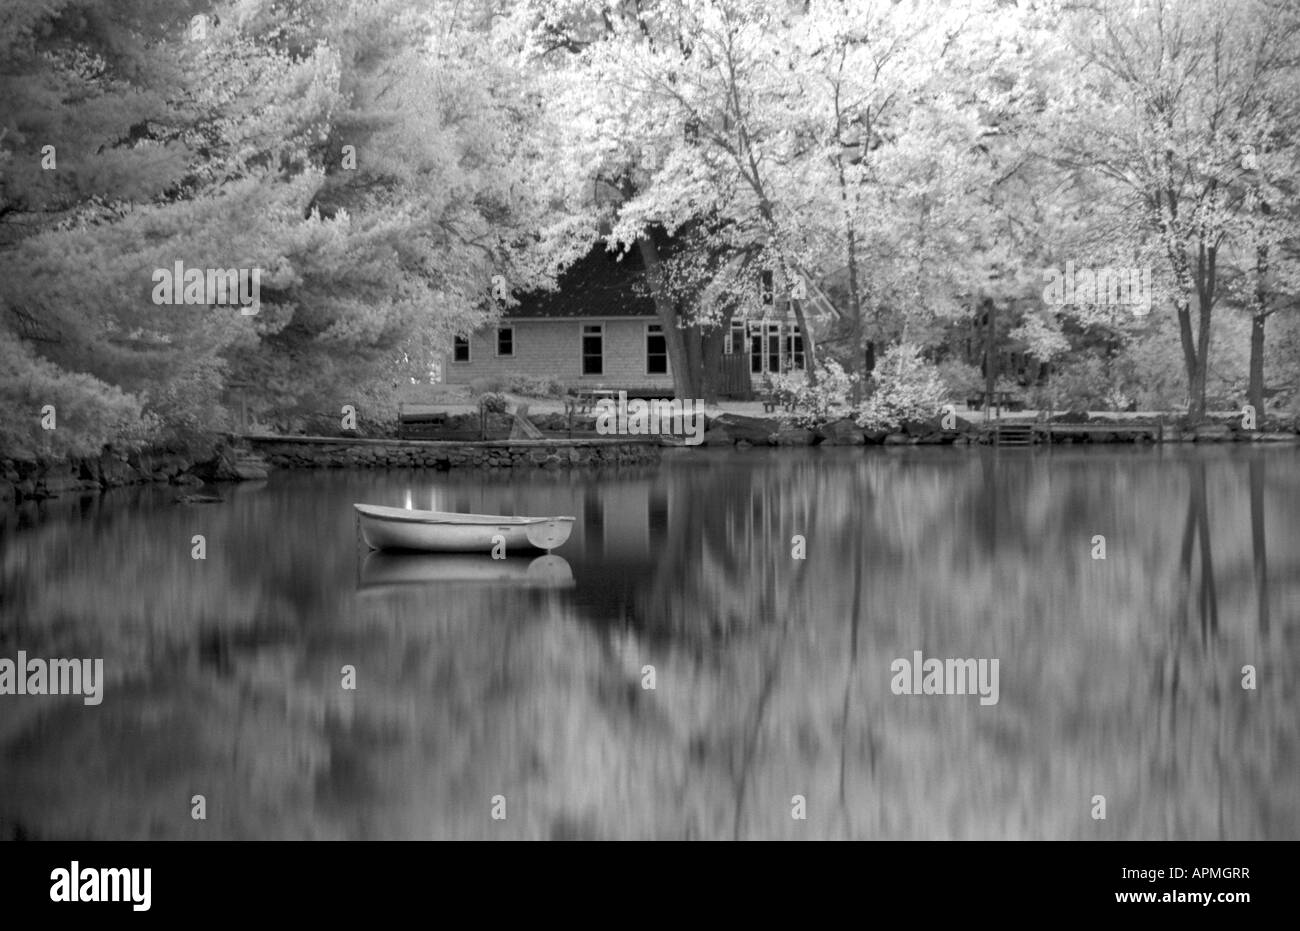 Peaceful quiet scene of lake and small boat in Long Lake in Bridgton Maine in New England in infrared alternative film process Stock Photo